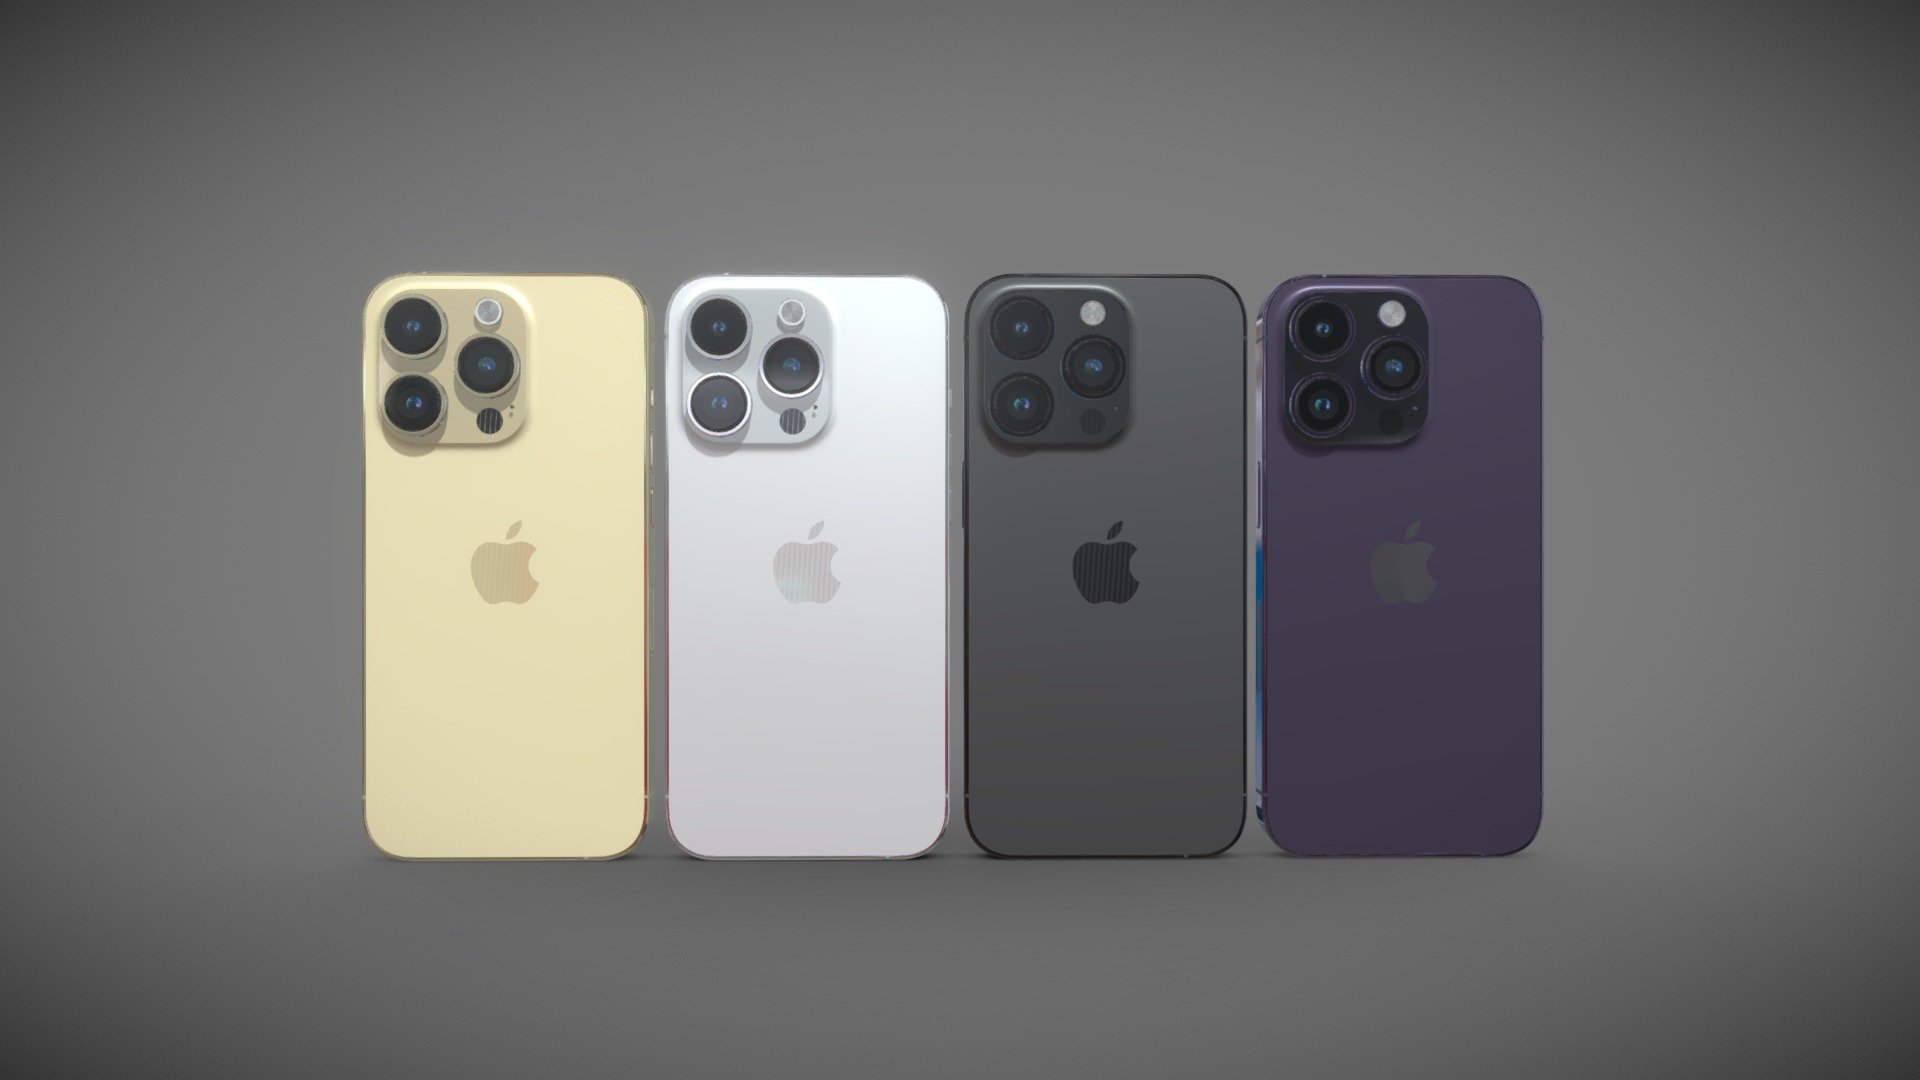 Realistic (copy) 3d model Apple iPhone 14 Pro all colors .

This set:




1 file obj standard

1 file 3ds Max 2013 vray material

1 file 3ds Max 2013 corona material

1 file of 3Ds

4 file e3d full set of materials.

4 file cinema 4d standard.

4 file blender cycles.

Topology of geometry:
- forms and proportions of The 3D model
- the geometry of the model was created very neatly
- there are no many-sided polygons
- detailed enough for close-up renders
- the model optimized for turbosmooth modifier
- Not collapsed the turbosmooth modified
- apply the Smooth modifier with a parameter to get the desired level of detail

Materials and Textures:
- 3ds max files included Vray-Shaders
- 3ds max files included Corona-Shaders
- Blender files included cycles shaders
- Cinema 4d files included Standard-Shaders
- Element 3d files
- all texture paths are cleared

Organization of scene:
- to all objects and materials
- real world size (system units - mm)
- coordinates of location of the model in space (x0, y0, z0) - Apple iPhone 14 Pro all colors - Buy Royalty Free 3D model by madMIX 3d model